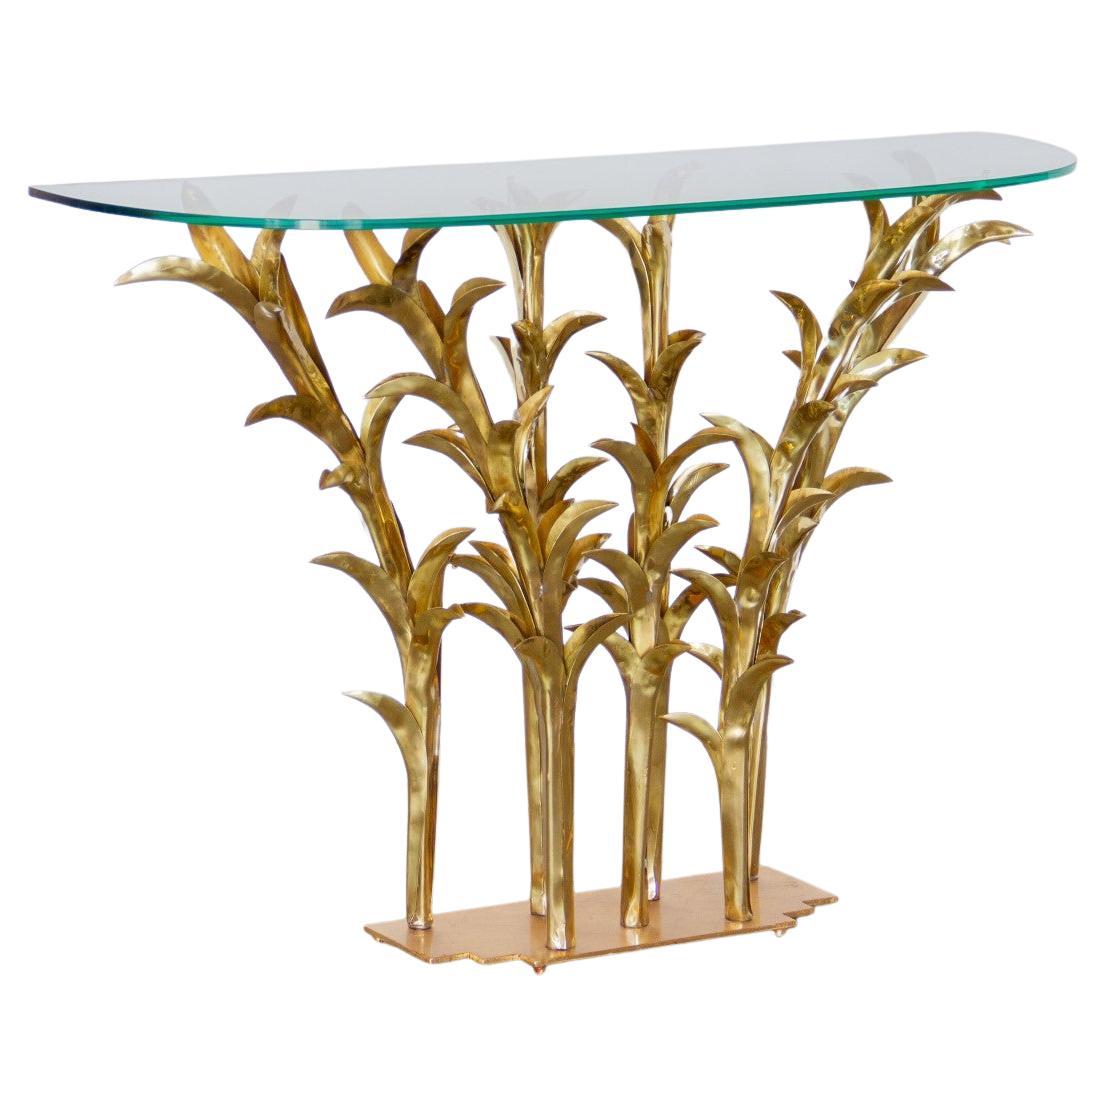 Sculptural Console Table by Alain Chervet, 1992 Titled 'Madere'